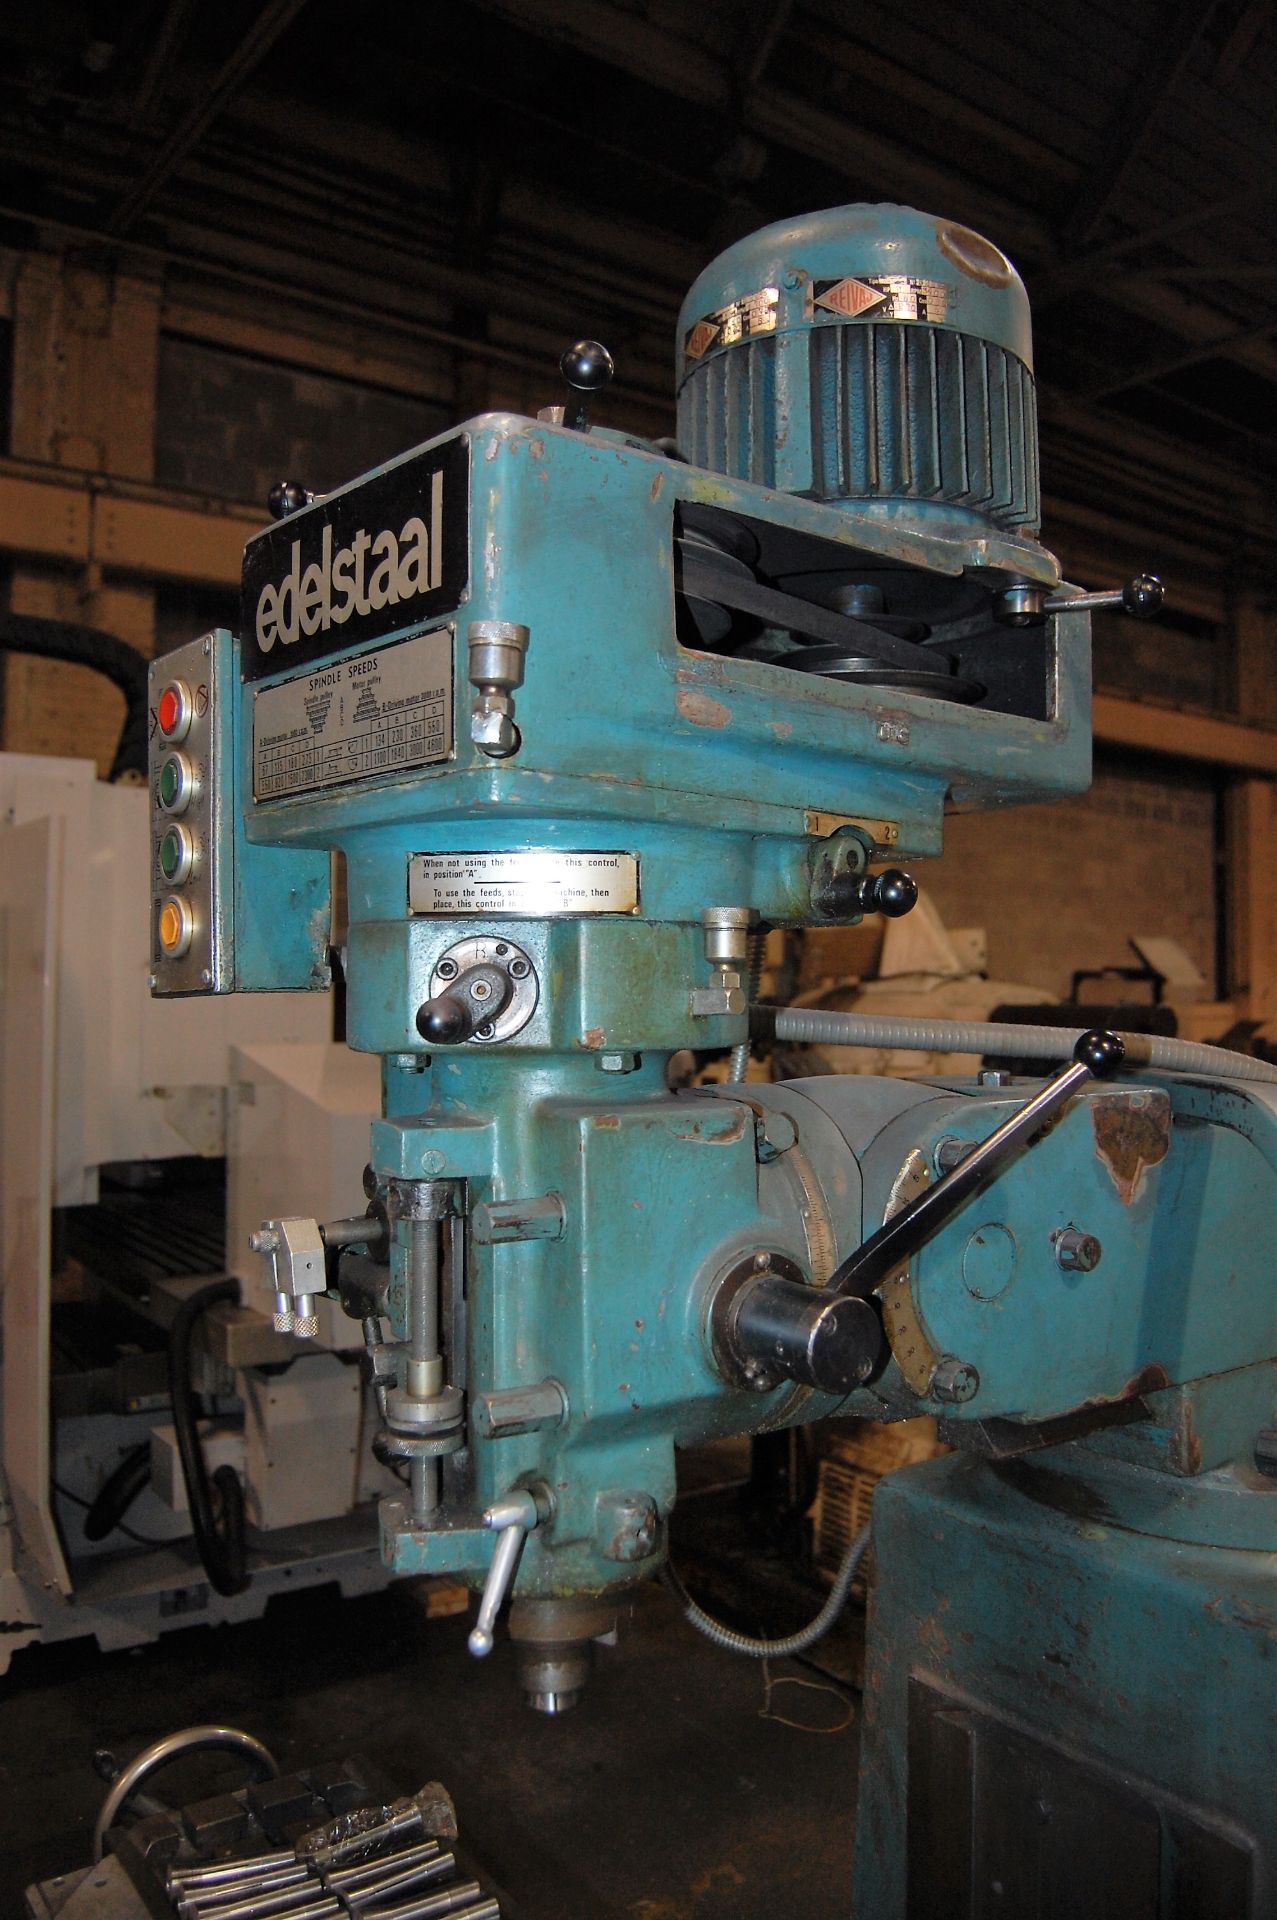 EDESTAAL 1.5HP VERTICAL MILL KNEE-TYPE MILL, R8 SPINDLE, 16-SPINDLE SPEEDS, 67-4600 RPM, 10" X 48" - Image 5 of 13